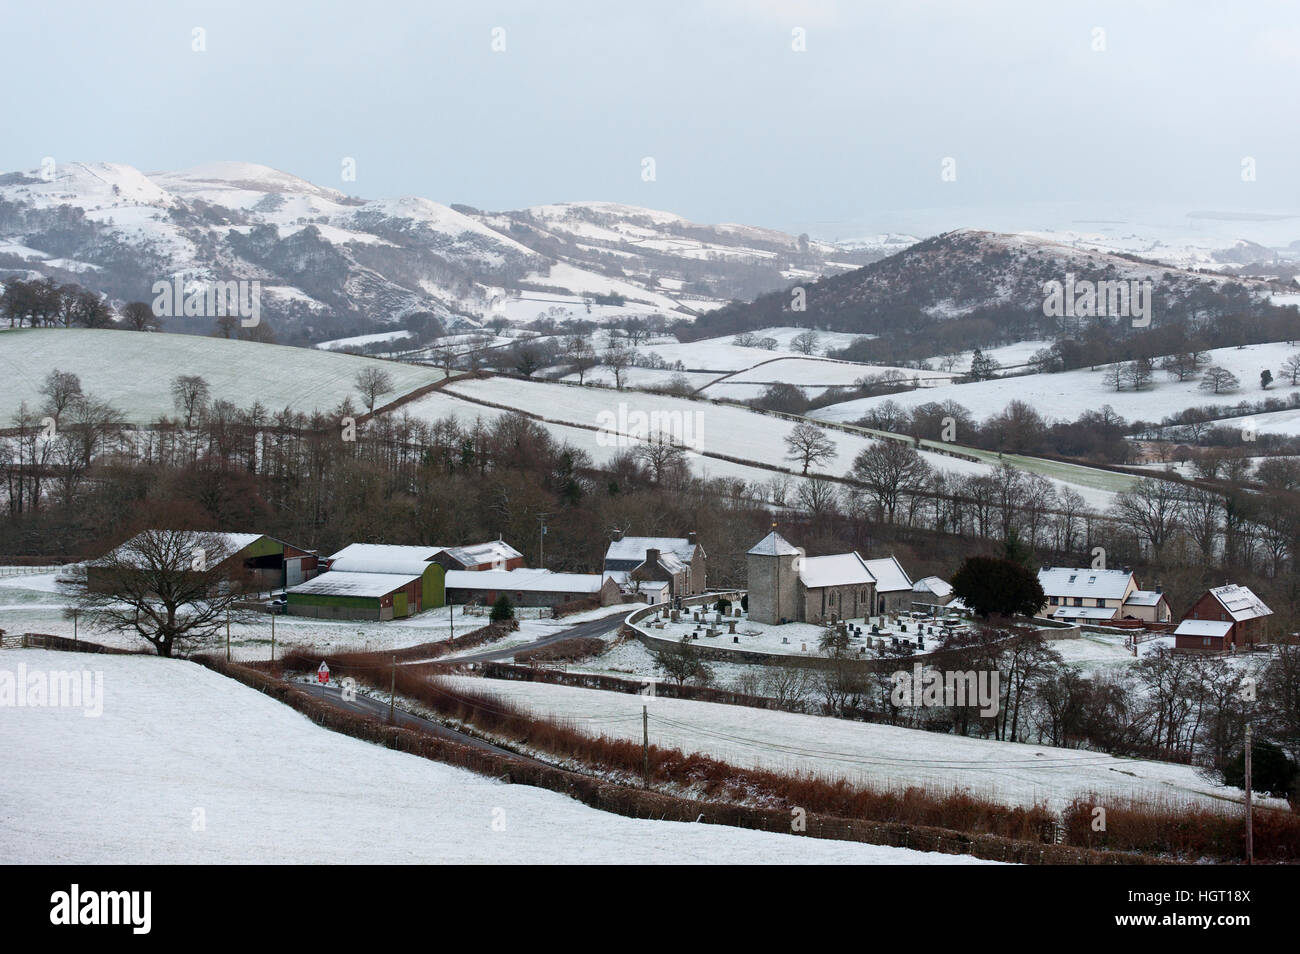 Llanddewi'r Cwm, Powys, Wales, UK. 13th January, 2017. St. David's Church in the tiny Welsh hamlet of Llanddewi'r Cwm, in Powys, UK. is surrounded by a wintry landscape © Graham M. Lawrence/Alamy Live News. Stock Photo